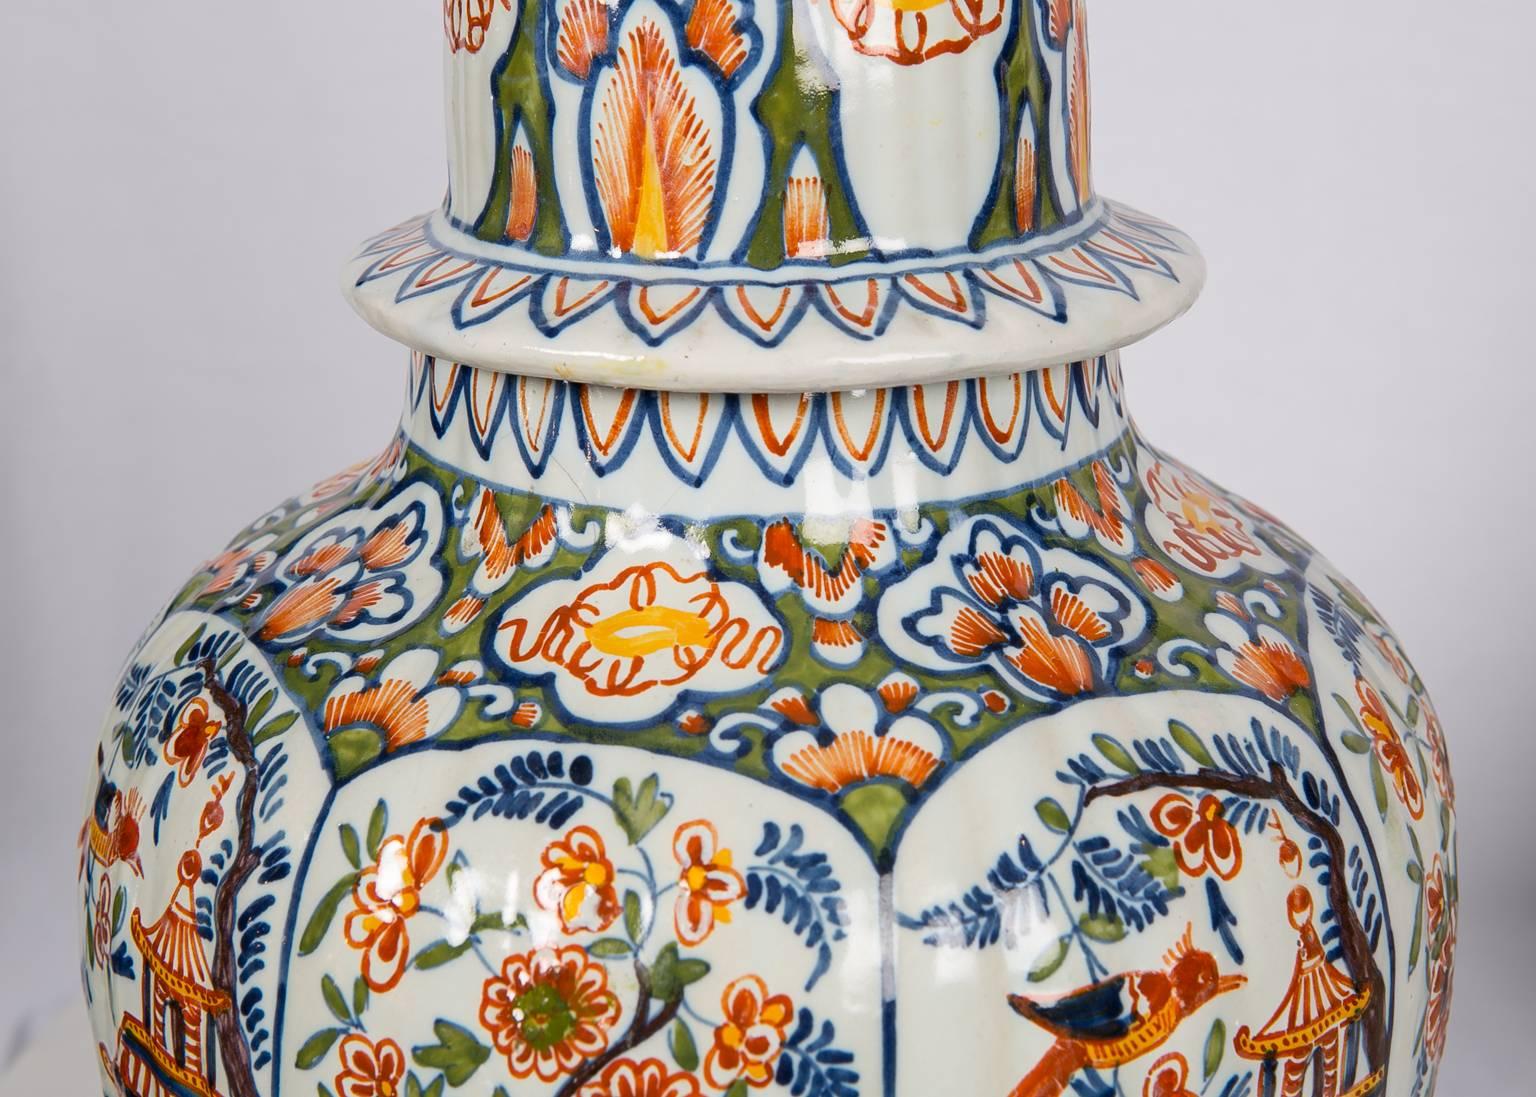 A pair of colorful Dutch Delft polychrome vases showing chinoiserie scenes painted in panels. In one panel we see a young woman with a basket of flowers standing before a pagoda, the other panel is filled with a  a flowering tree and a garden fence.